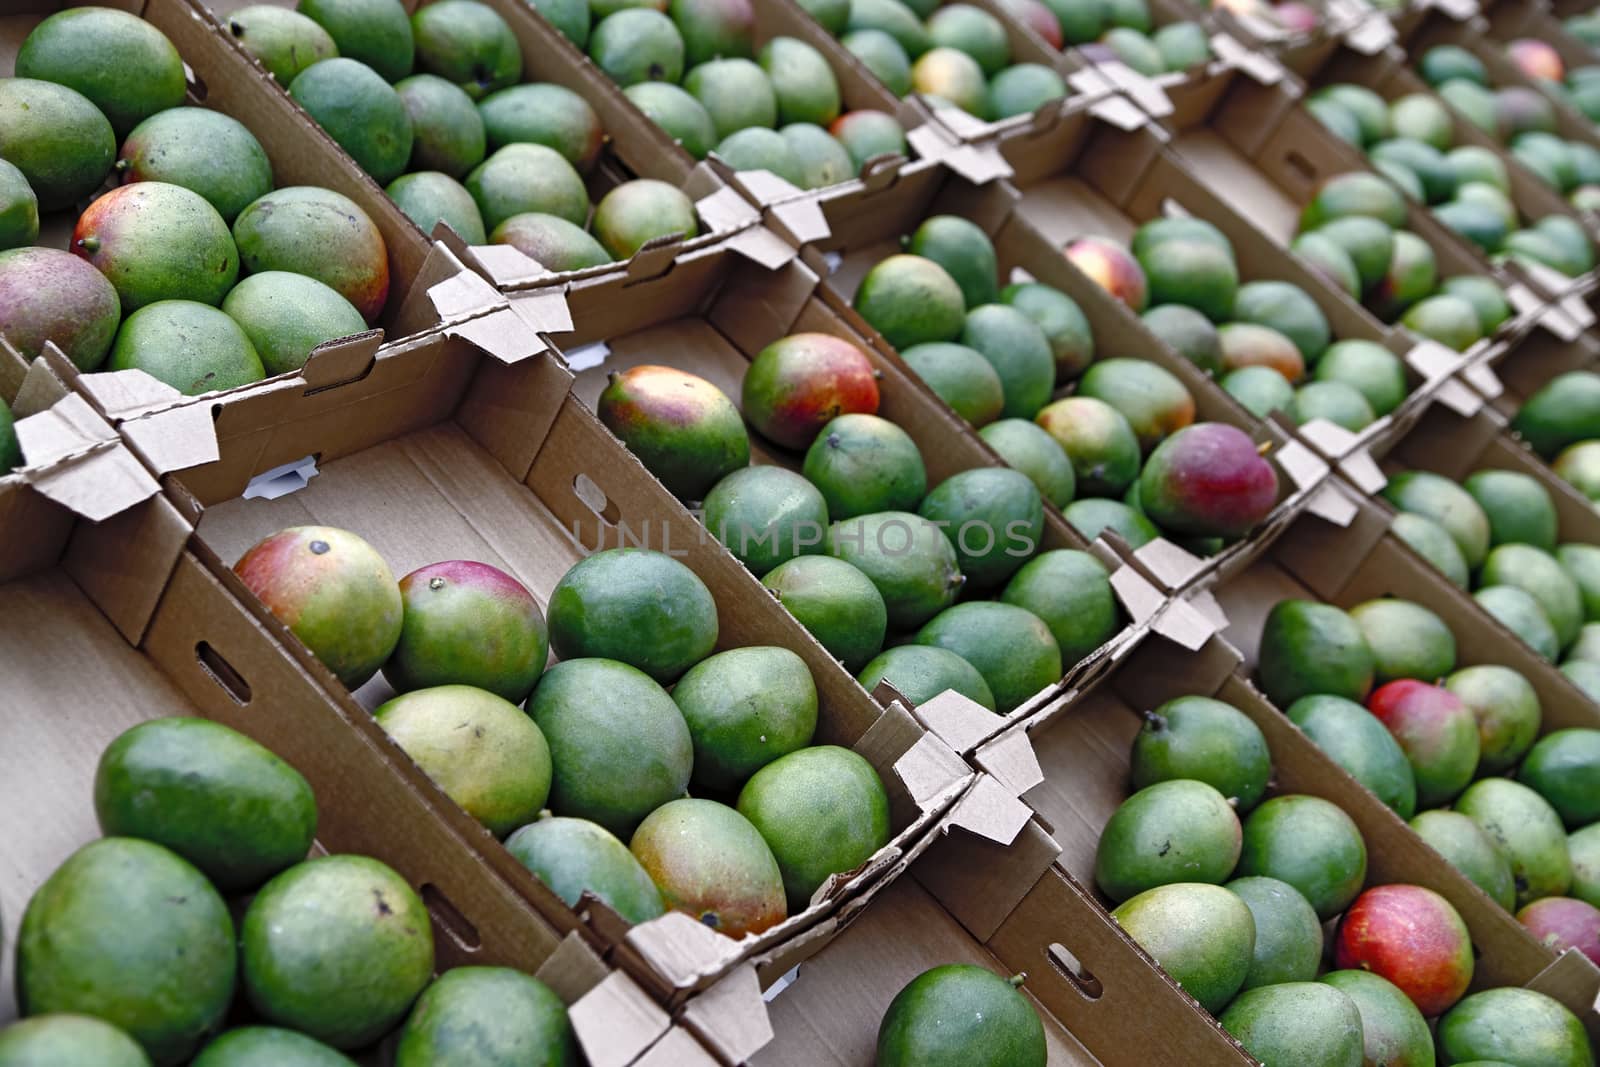 Seasonal fruits are placed in boxes in the grocery store. Many mangoes are lined in rows. Natural foods rich in vitamins for a healthy diet.